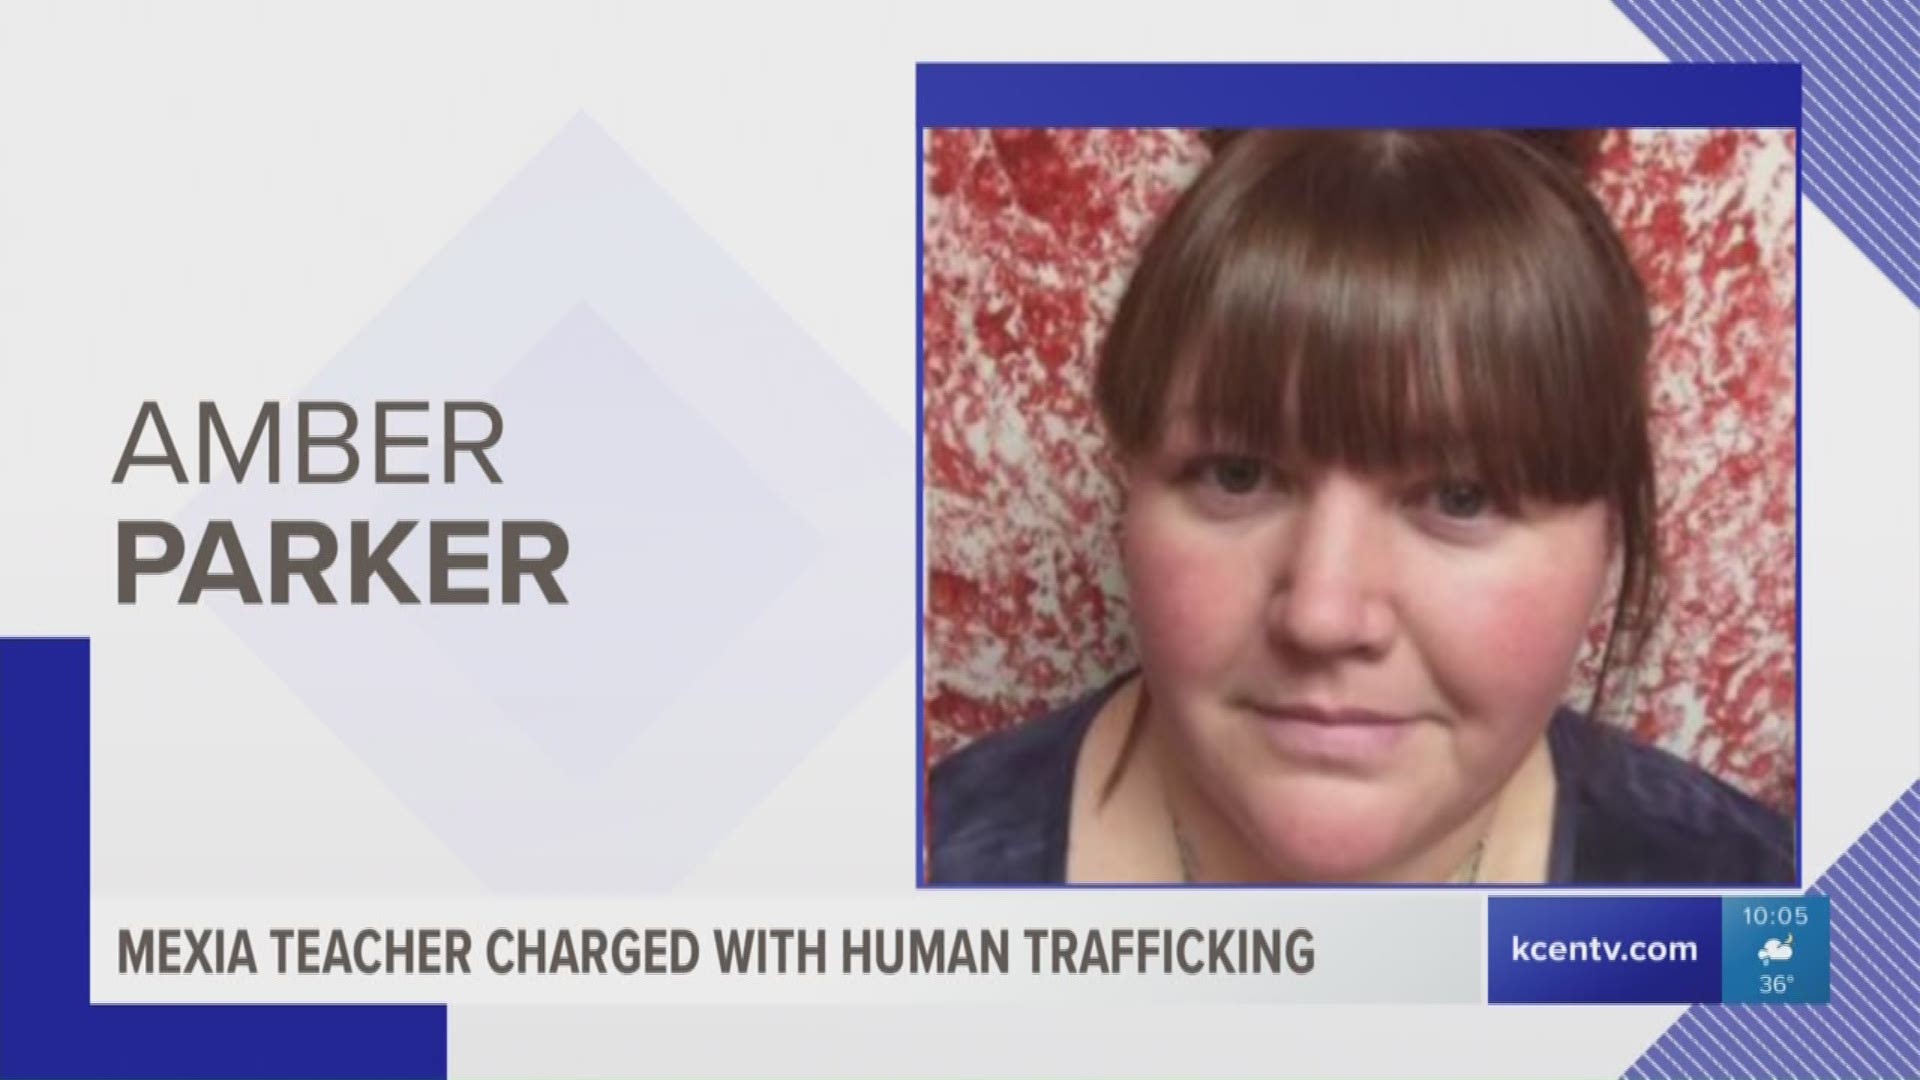 According to McLennan County Sheriff Parnell McNamara, 37-year-old Amber Parker tried to take a girl to Morocco to meet with men and have sex.